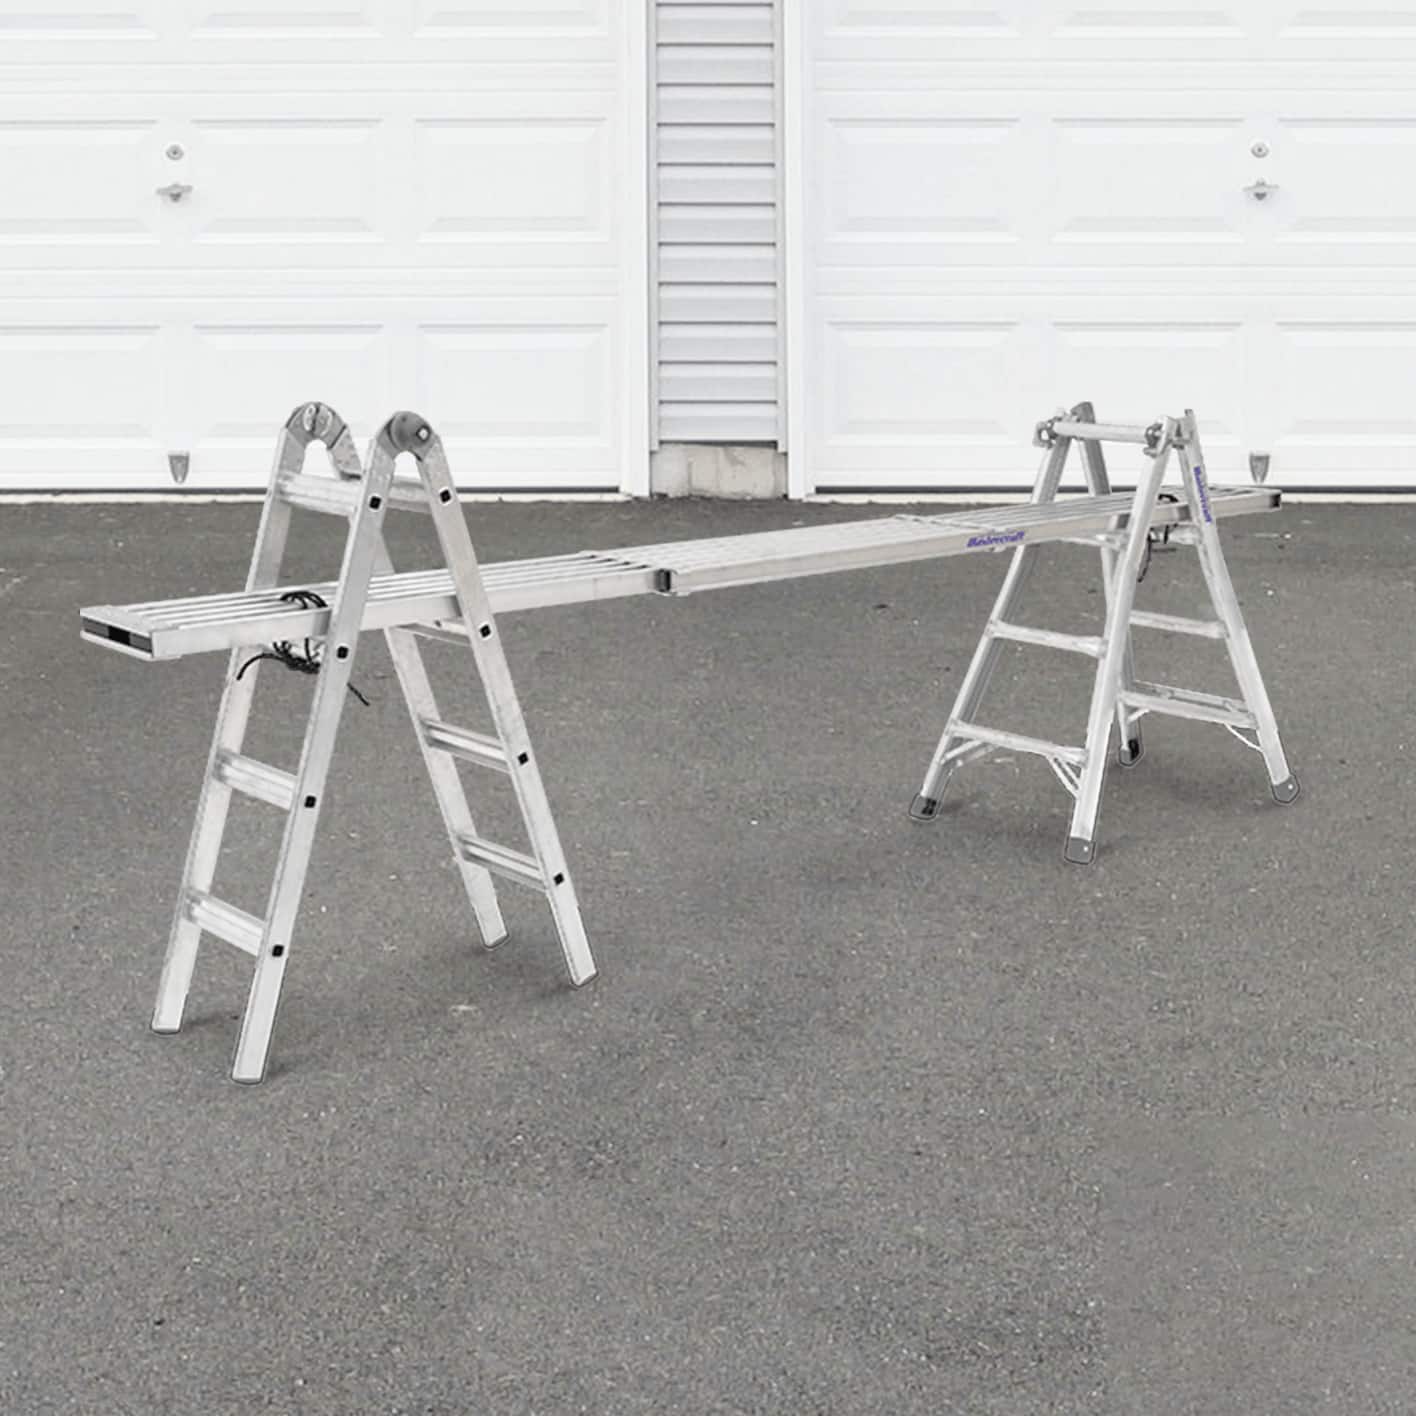 Two Mastercraft ladders with scaffolding